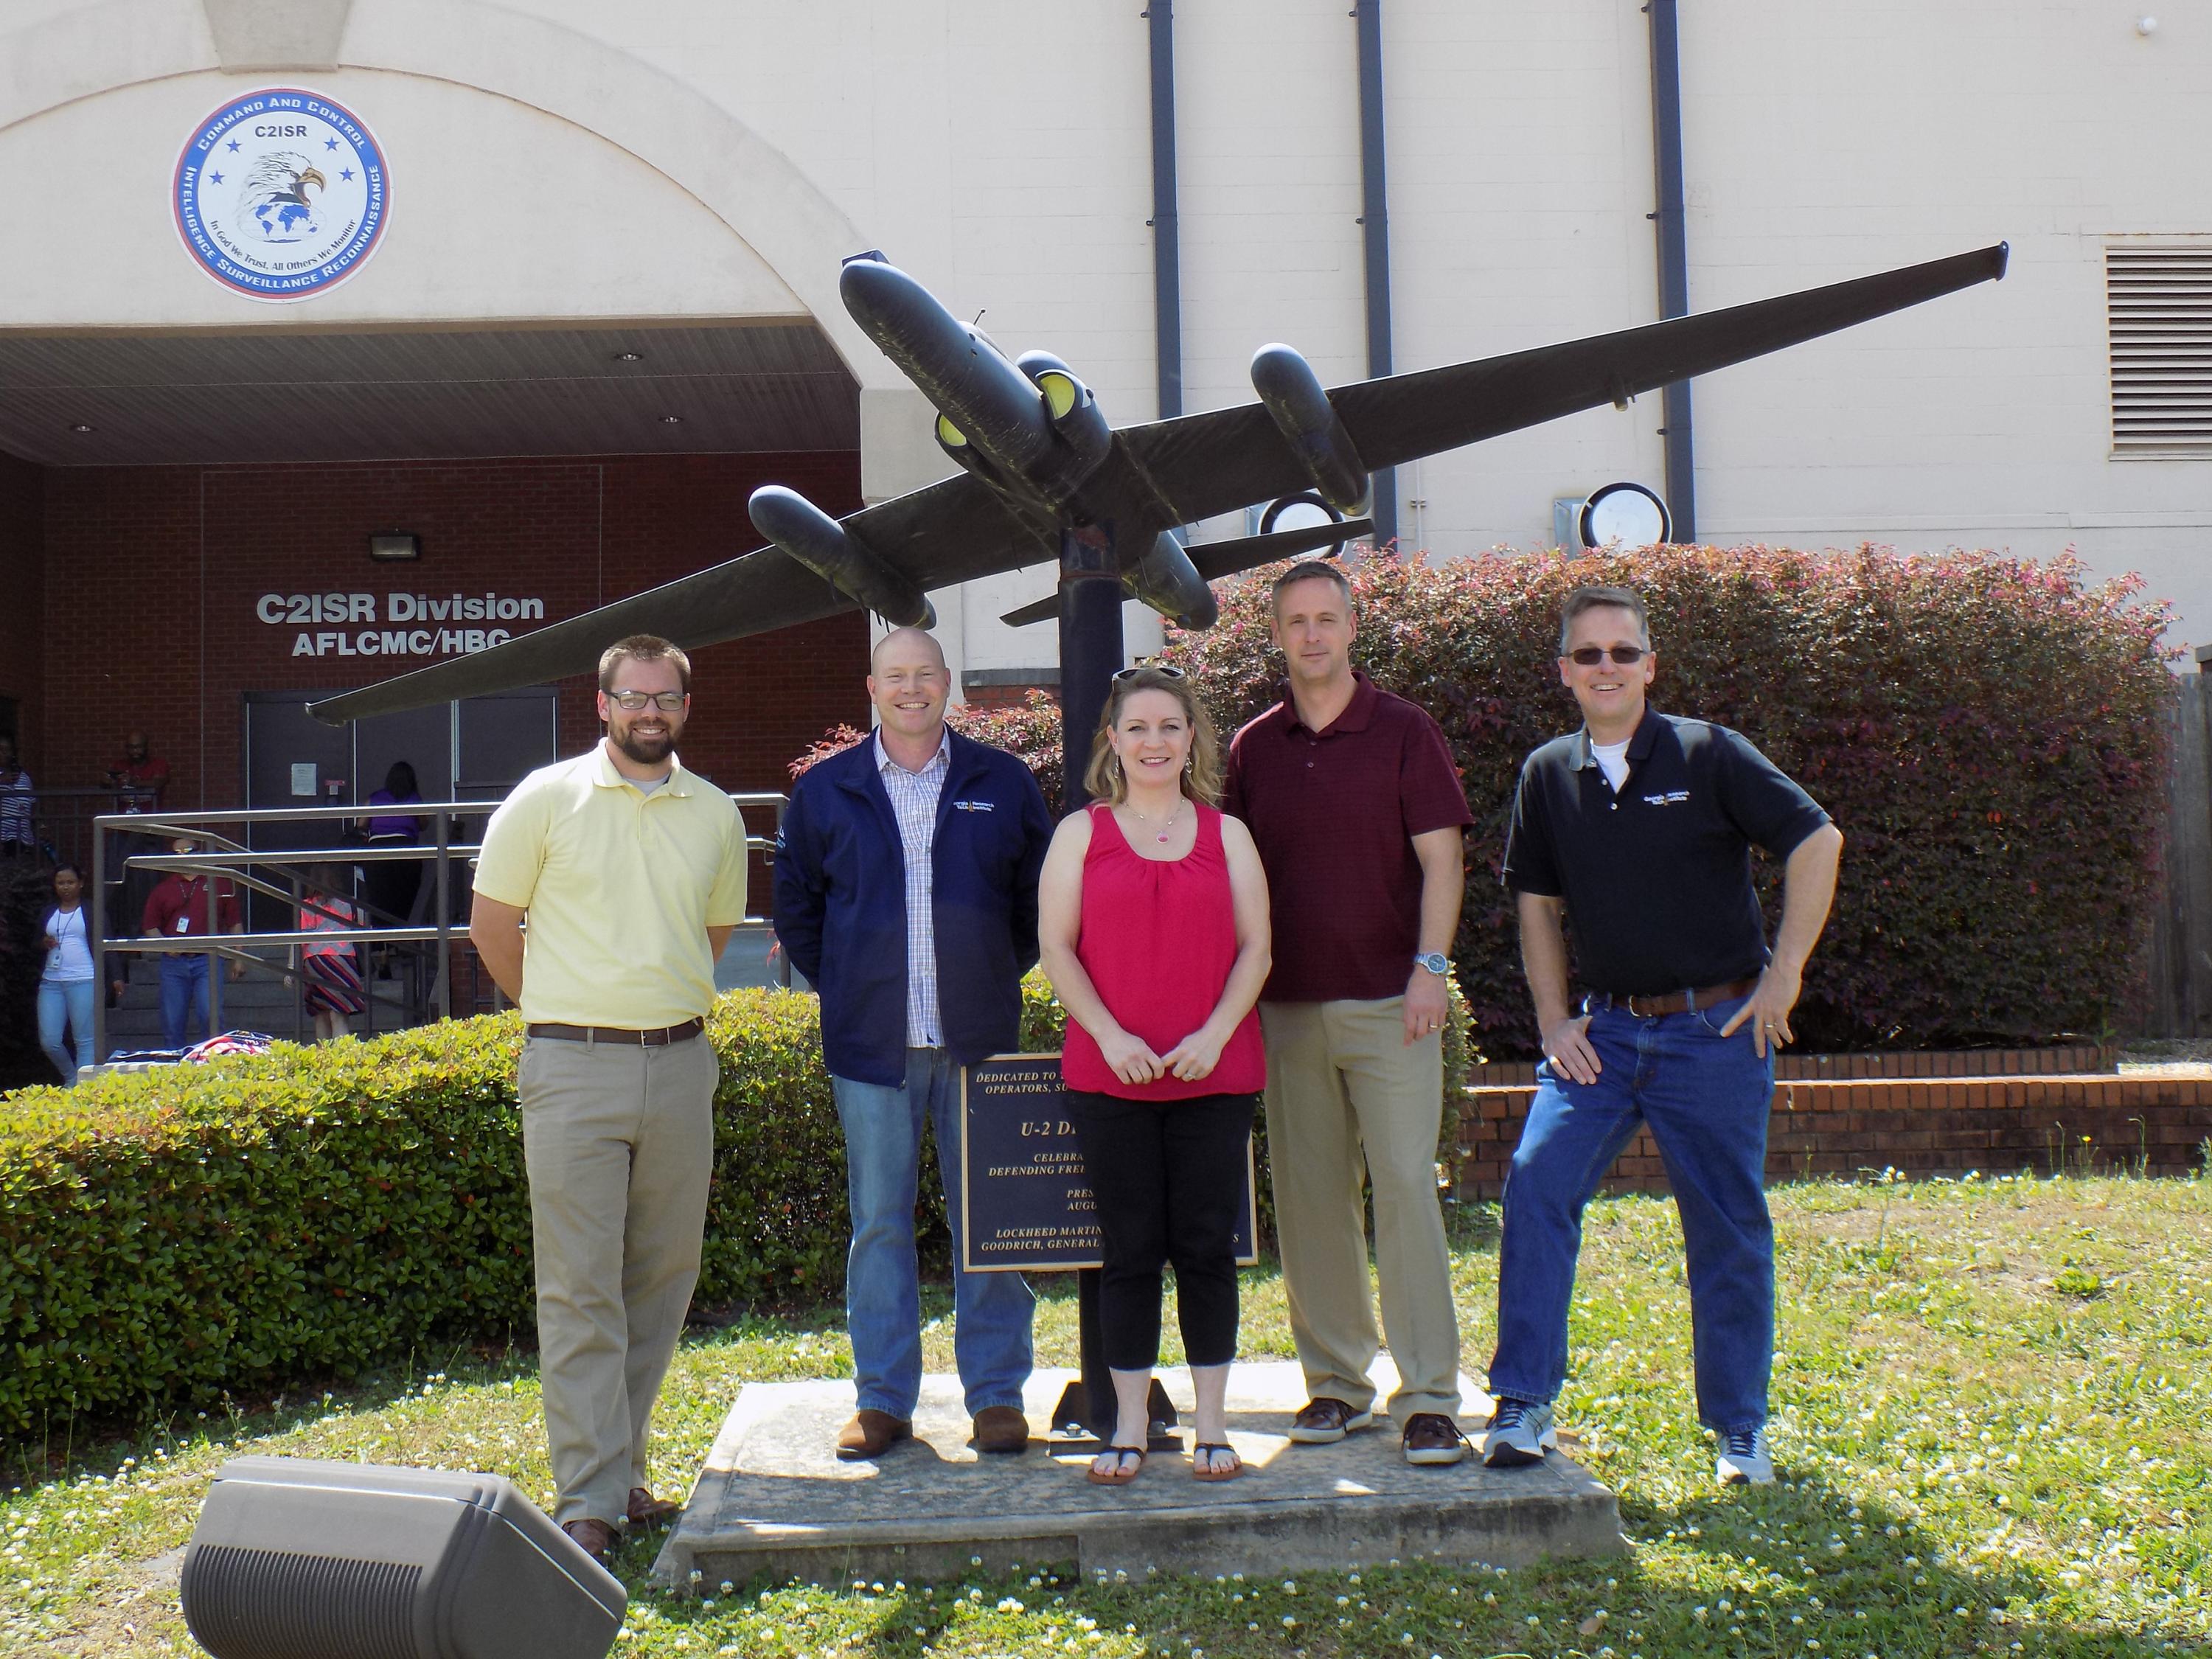 Photo shows a portion of the Warner Robins-based GTRI team that is supporting the Air Force Distributed Common Ground System. Shown (left-to-right) are Derek Munday, Shawn Ashley, Amy Donovan, Clayton Besse and Mark Burnette. (Photo Credit: Georgia Tech Research Institute)